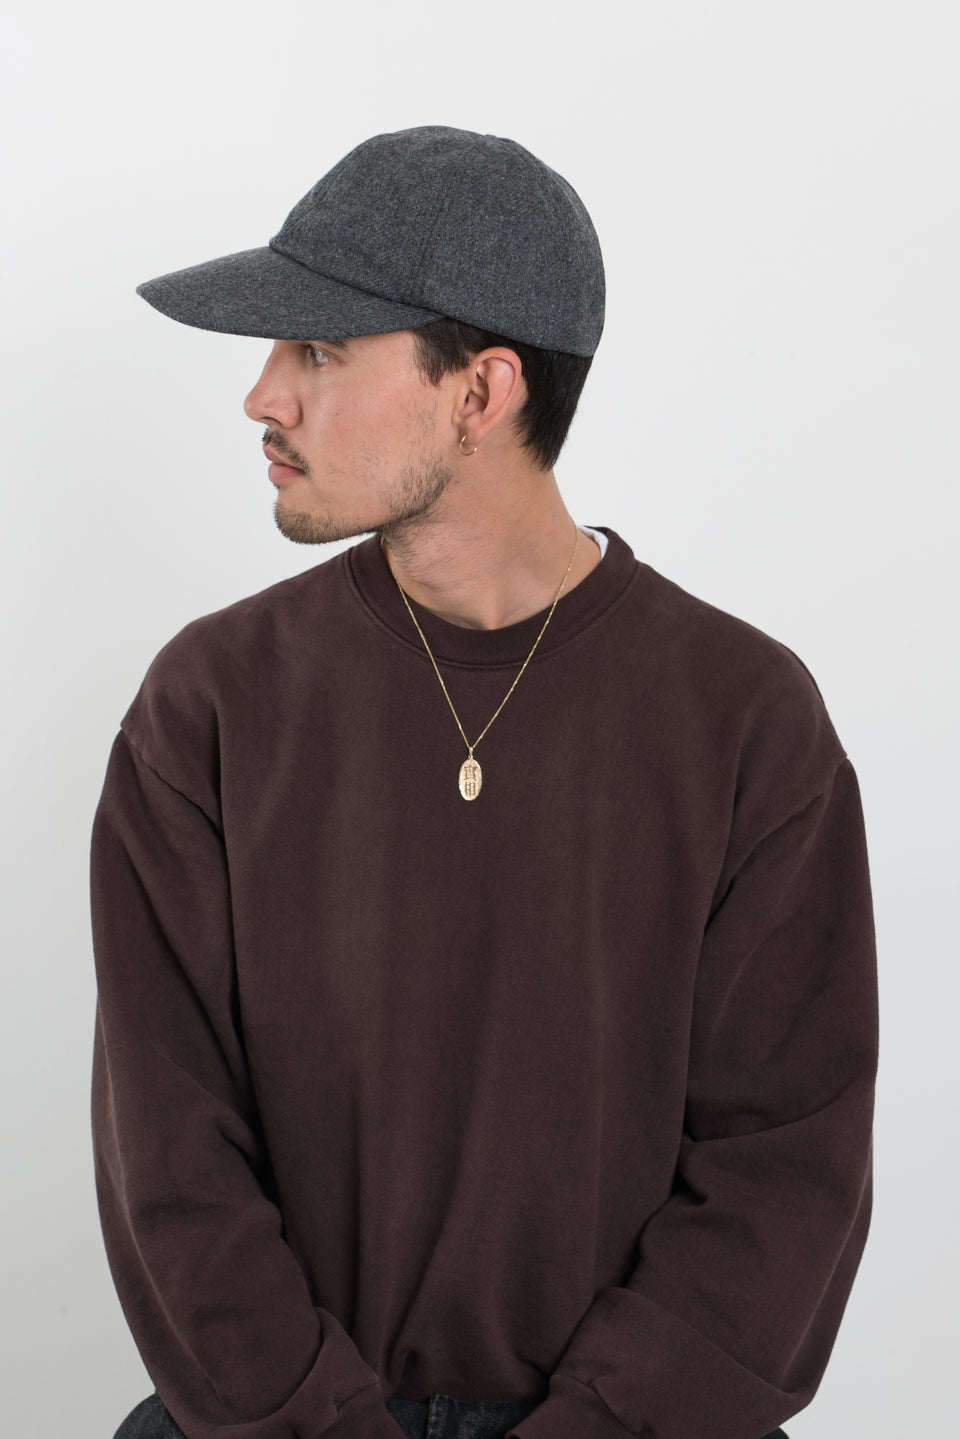 Found Feather Japan FW22 Classic 6 Panel Cap Mélange Wool Charcoal Calculus Victoria BC Canada